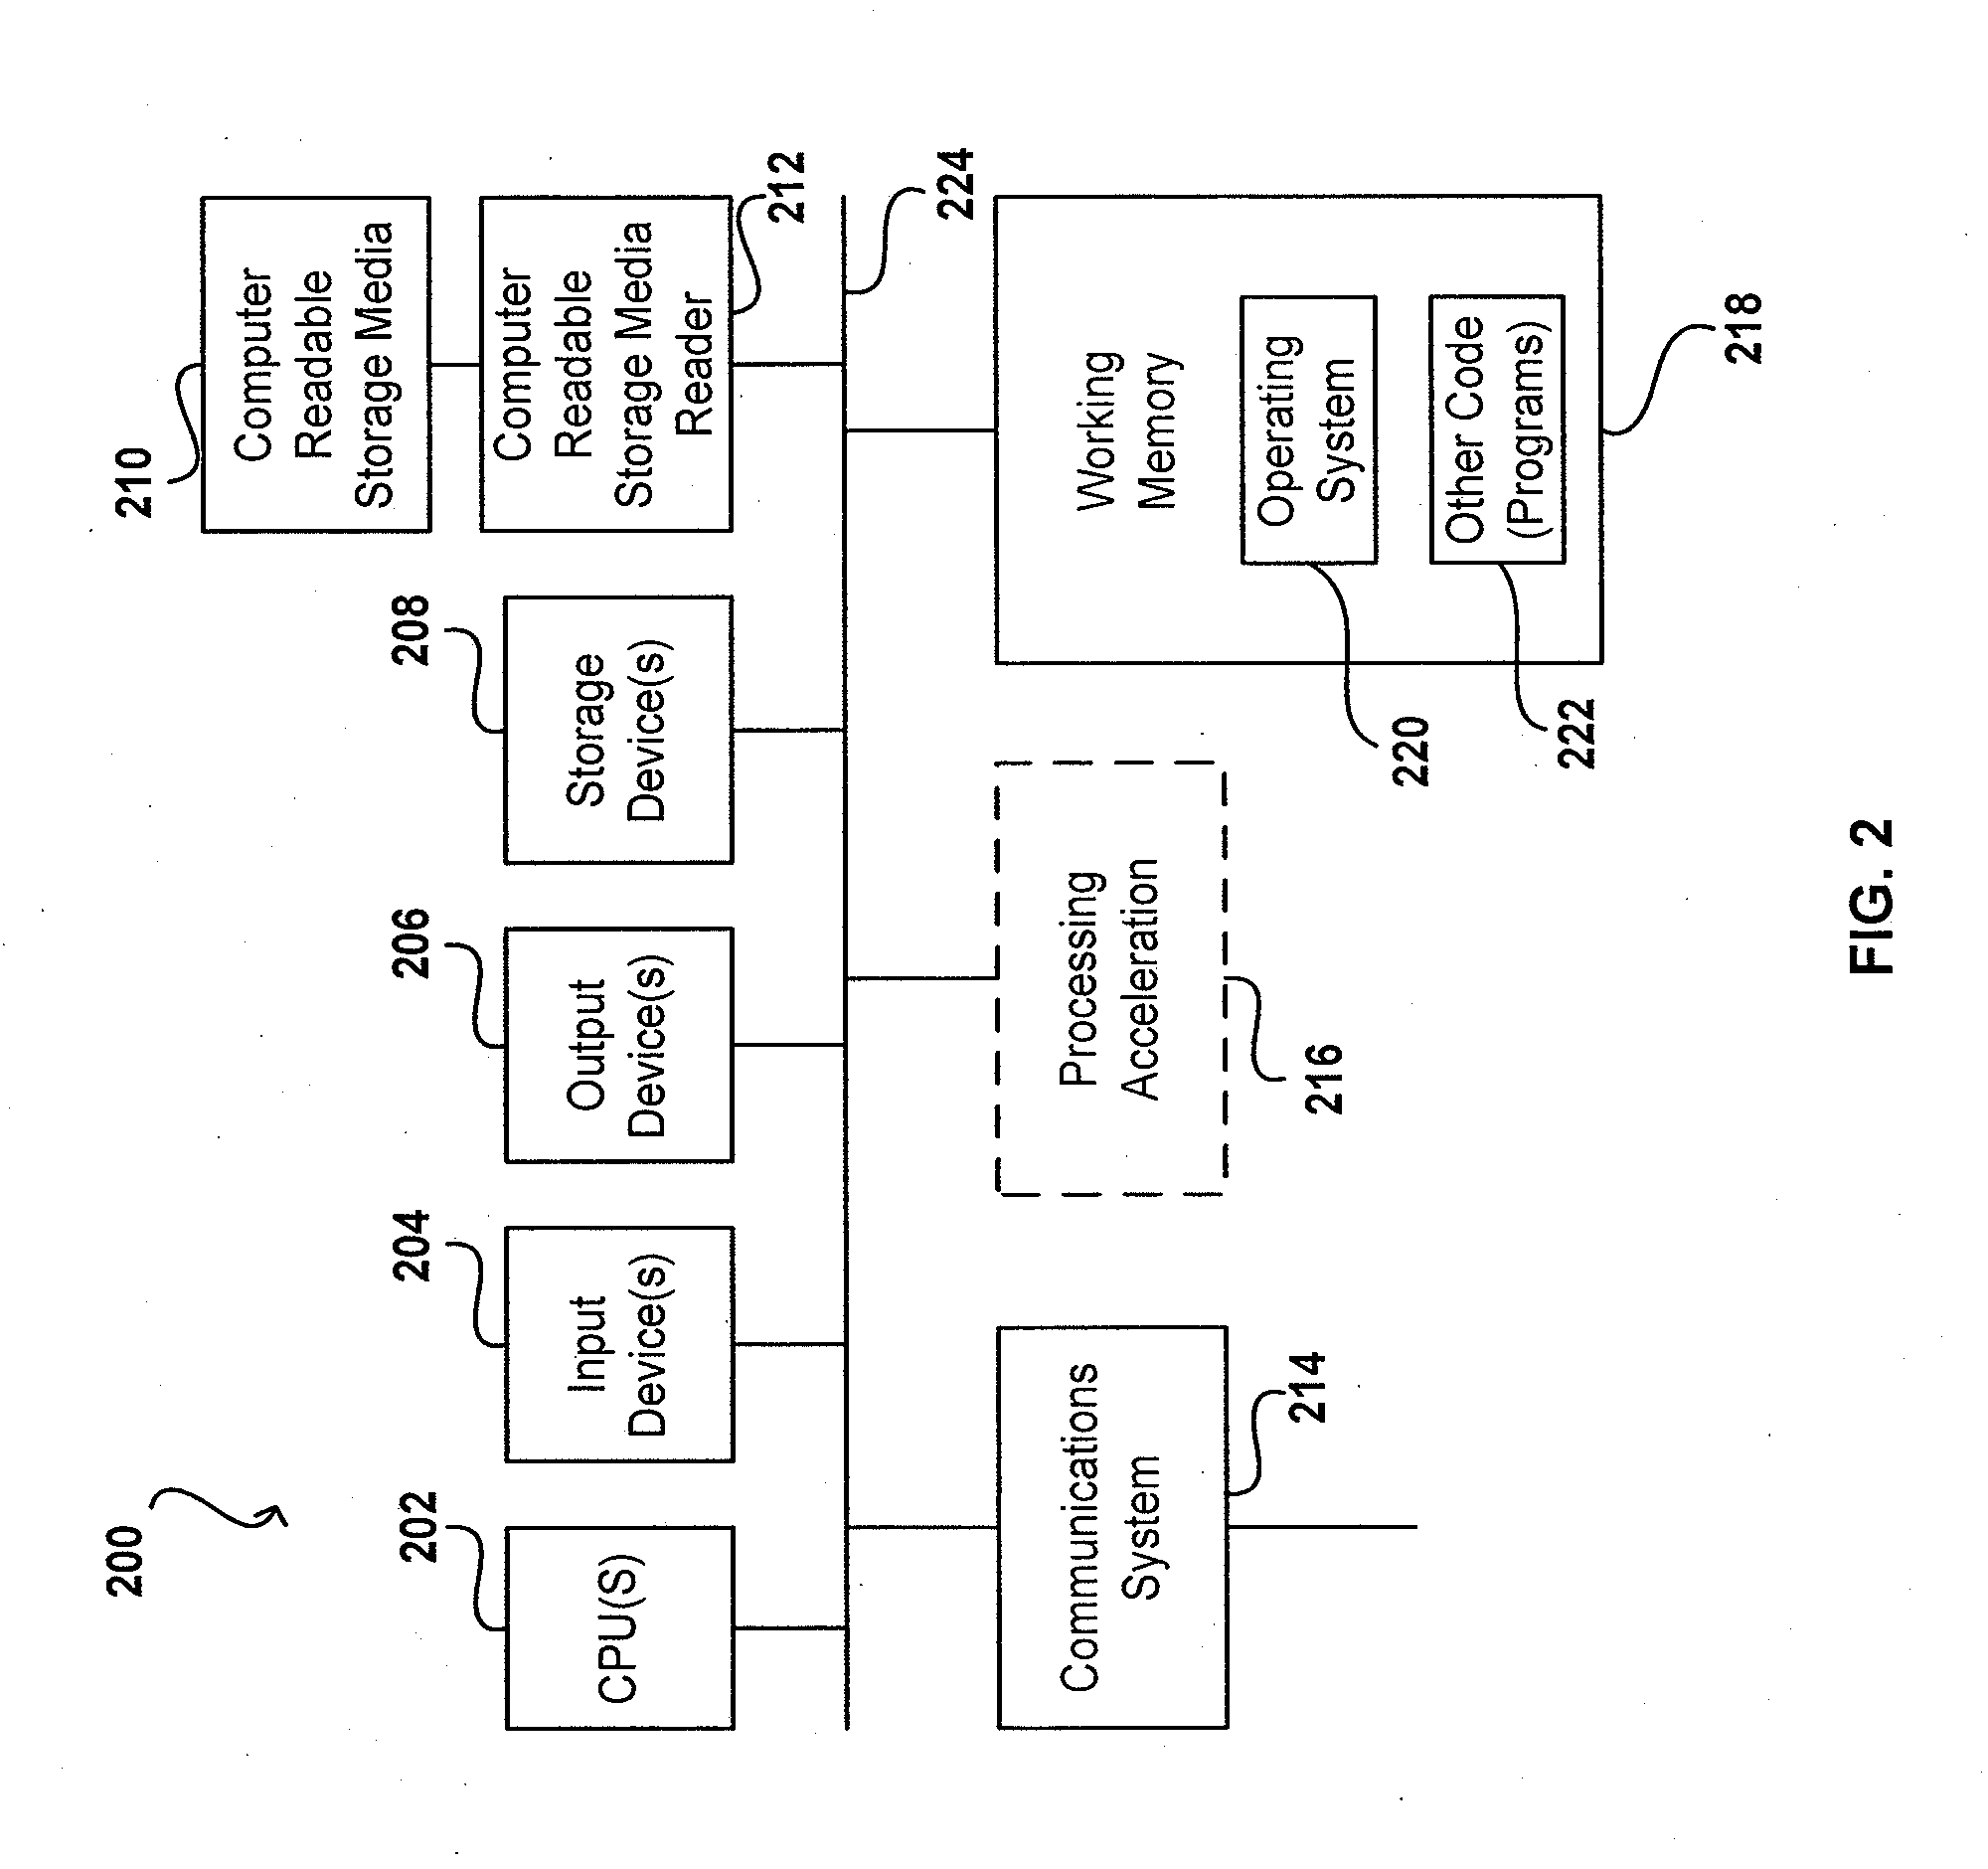 System and method for non-credit card billers to accept credit card payments